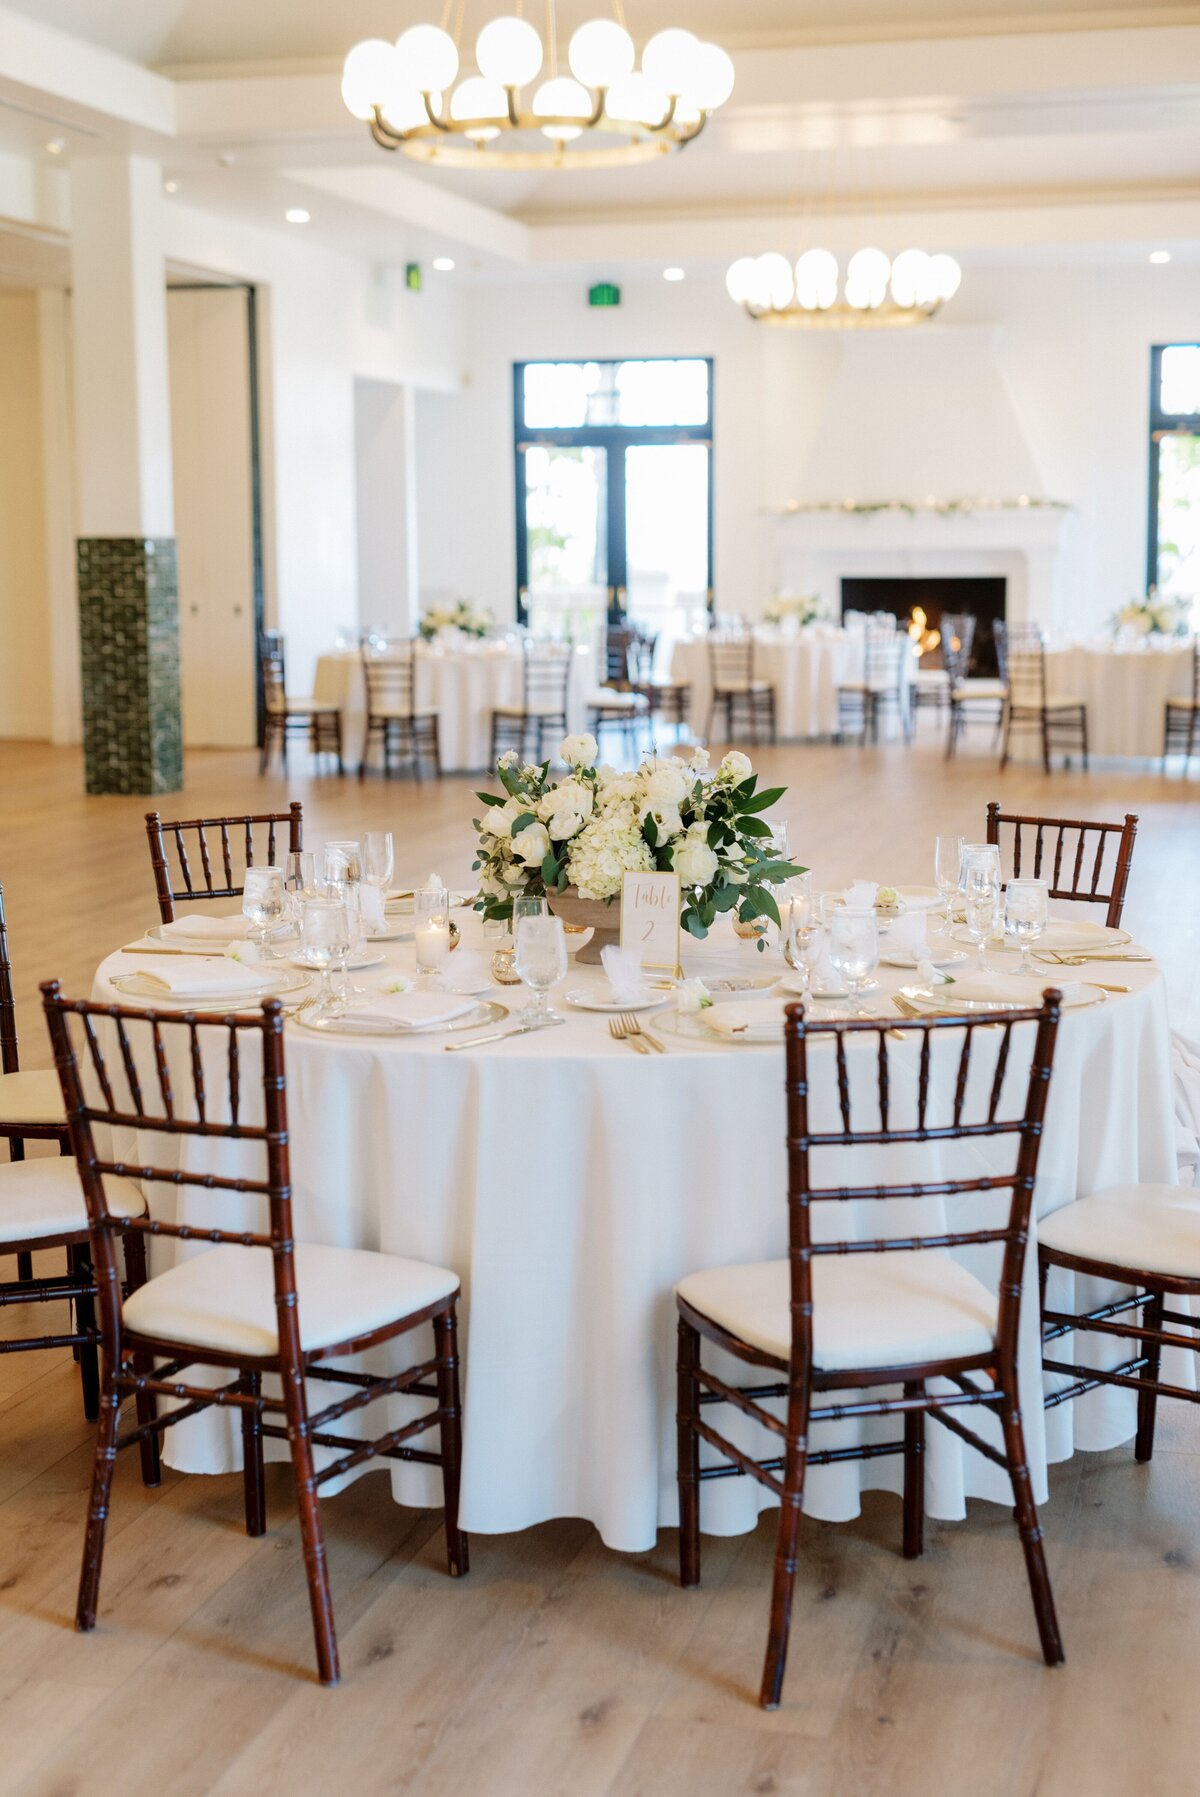 A wedding dining table holding white bouquets.